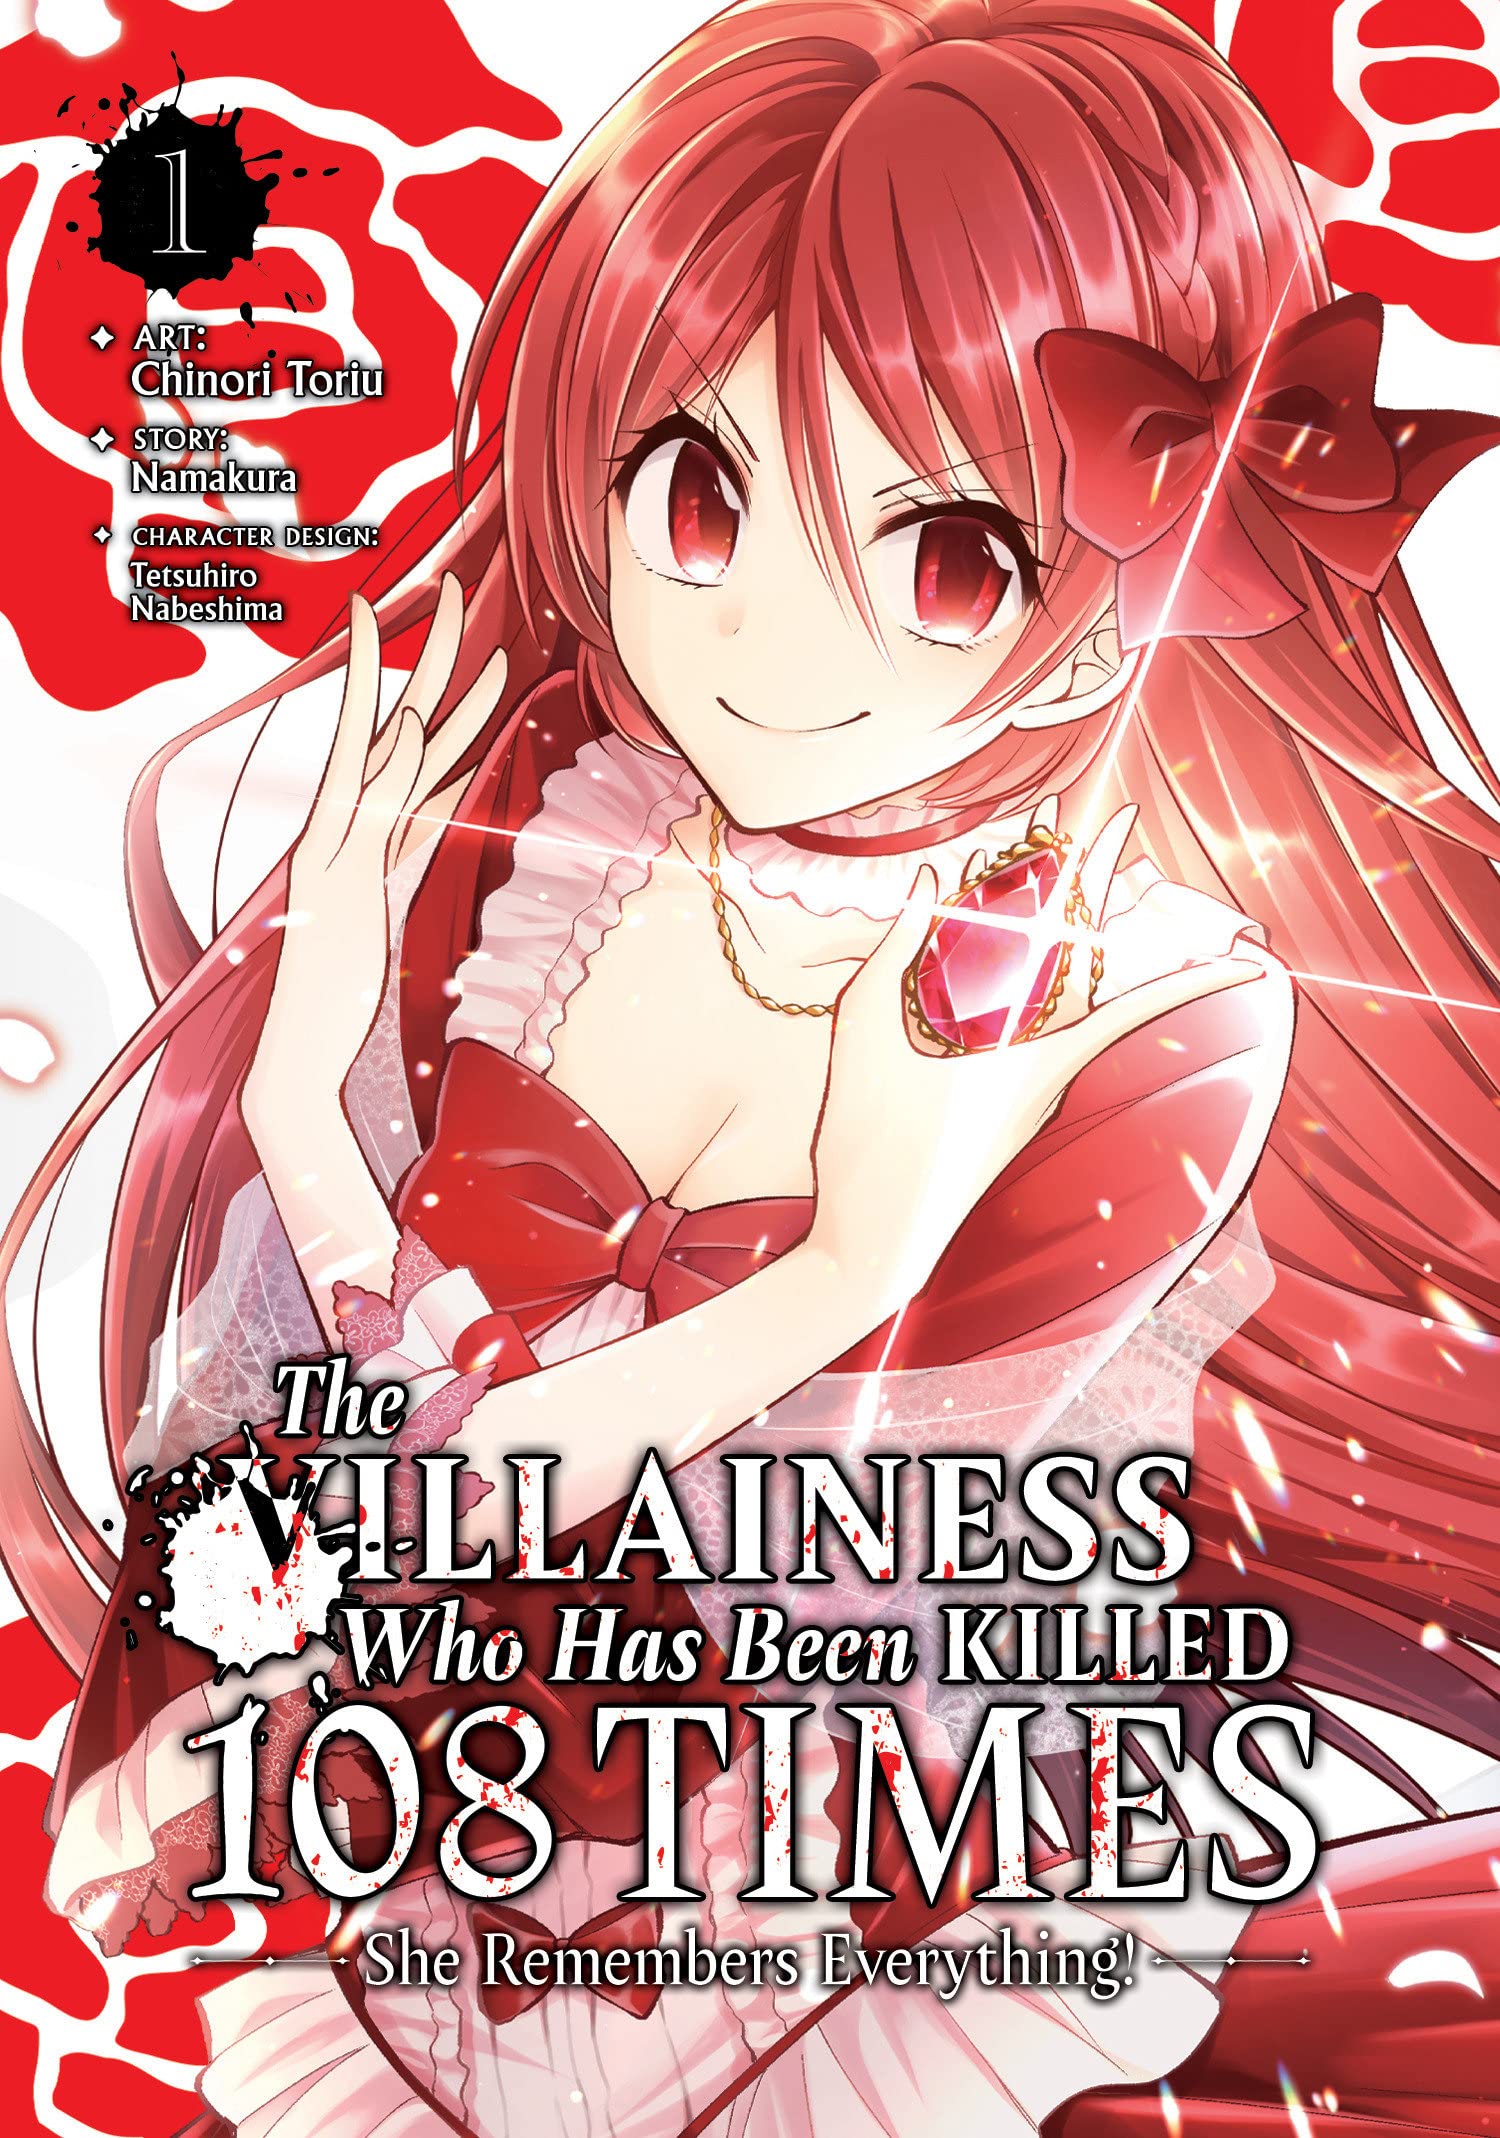 The Villainess Who Has Been Killed 108 Times: She Remembers Everything! (Manga) Vol. 01